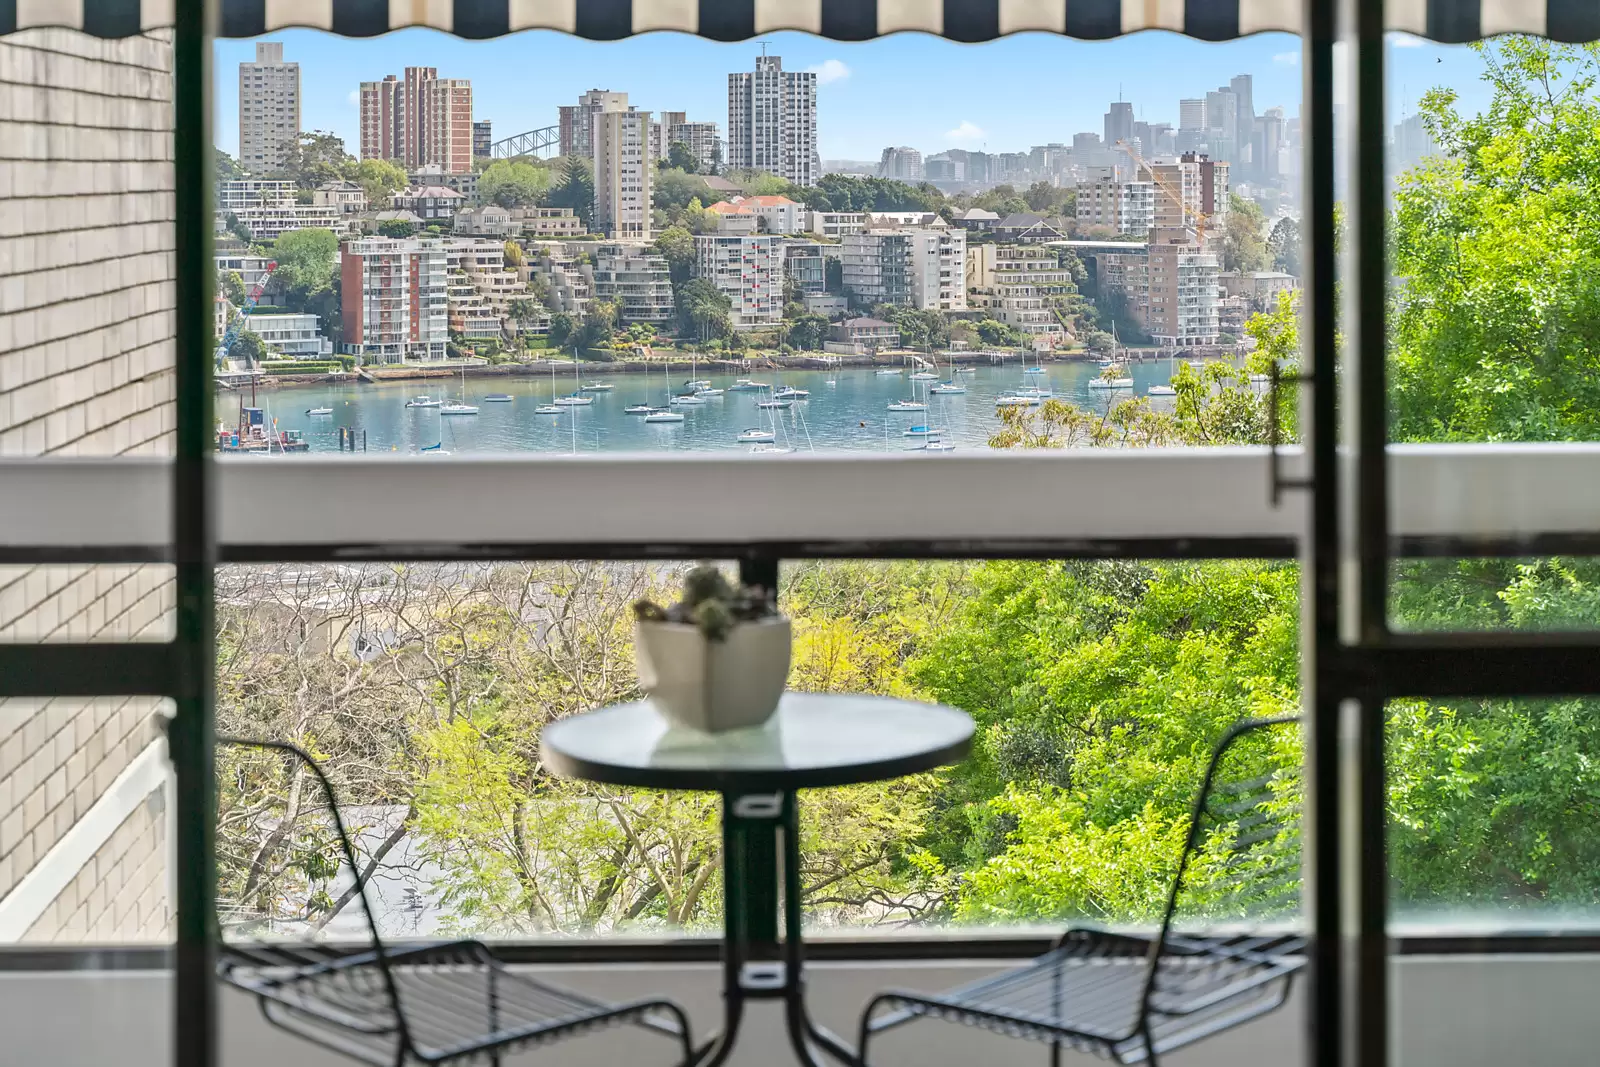 Photo #10: 52/36 Fairfax Road, Bellevue Hill - Auction by Sydney Sotheby's International Realty